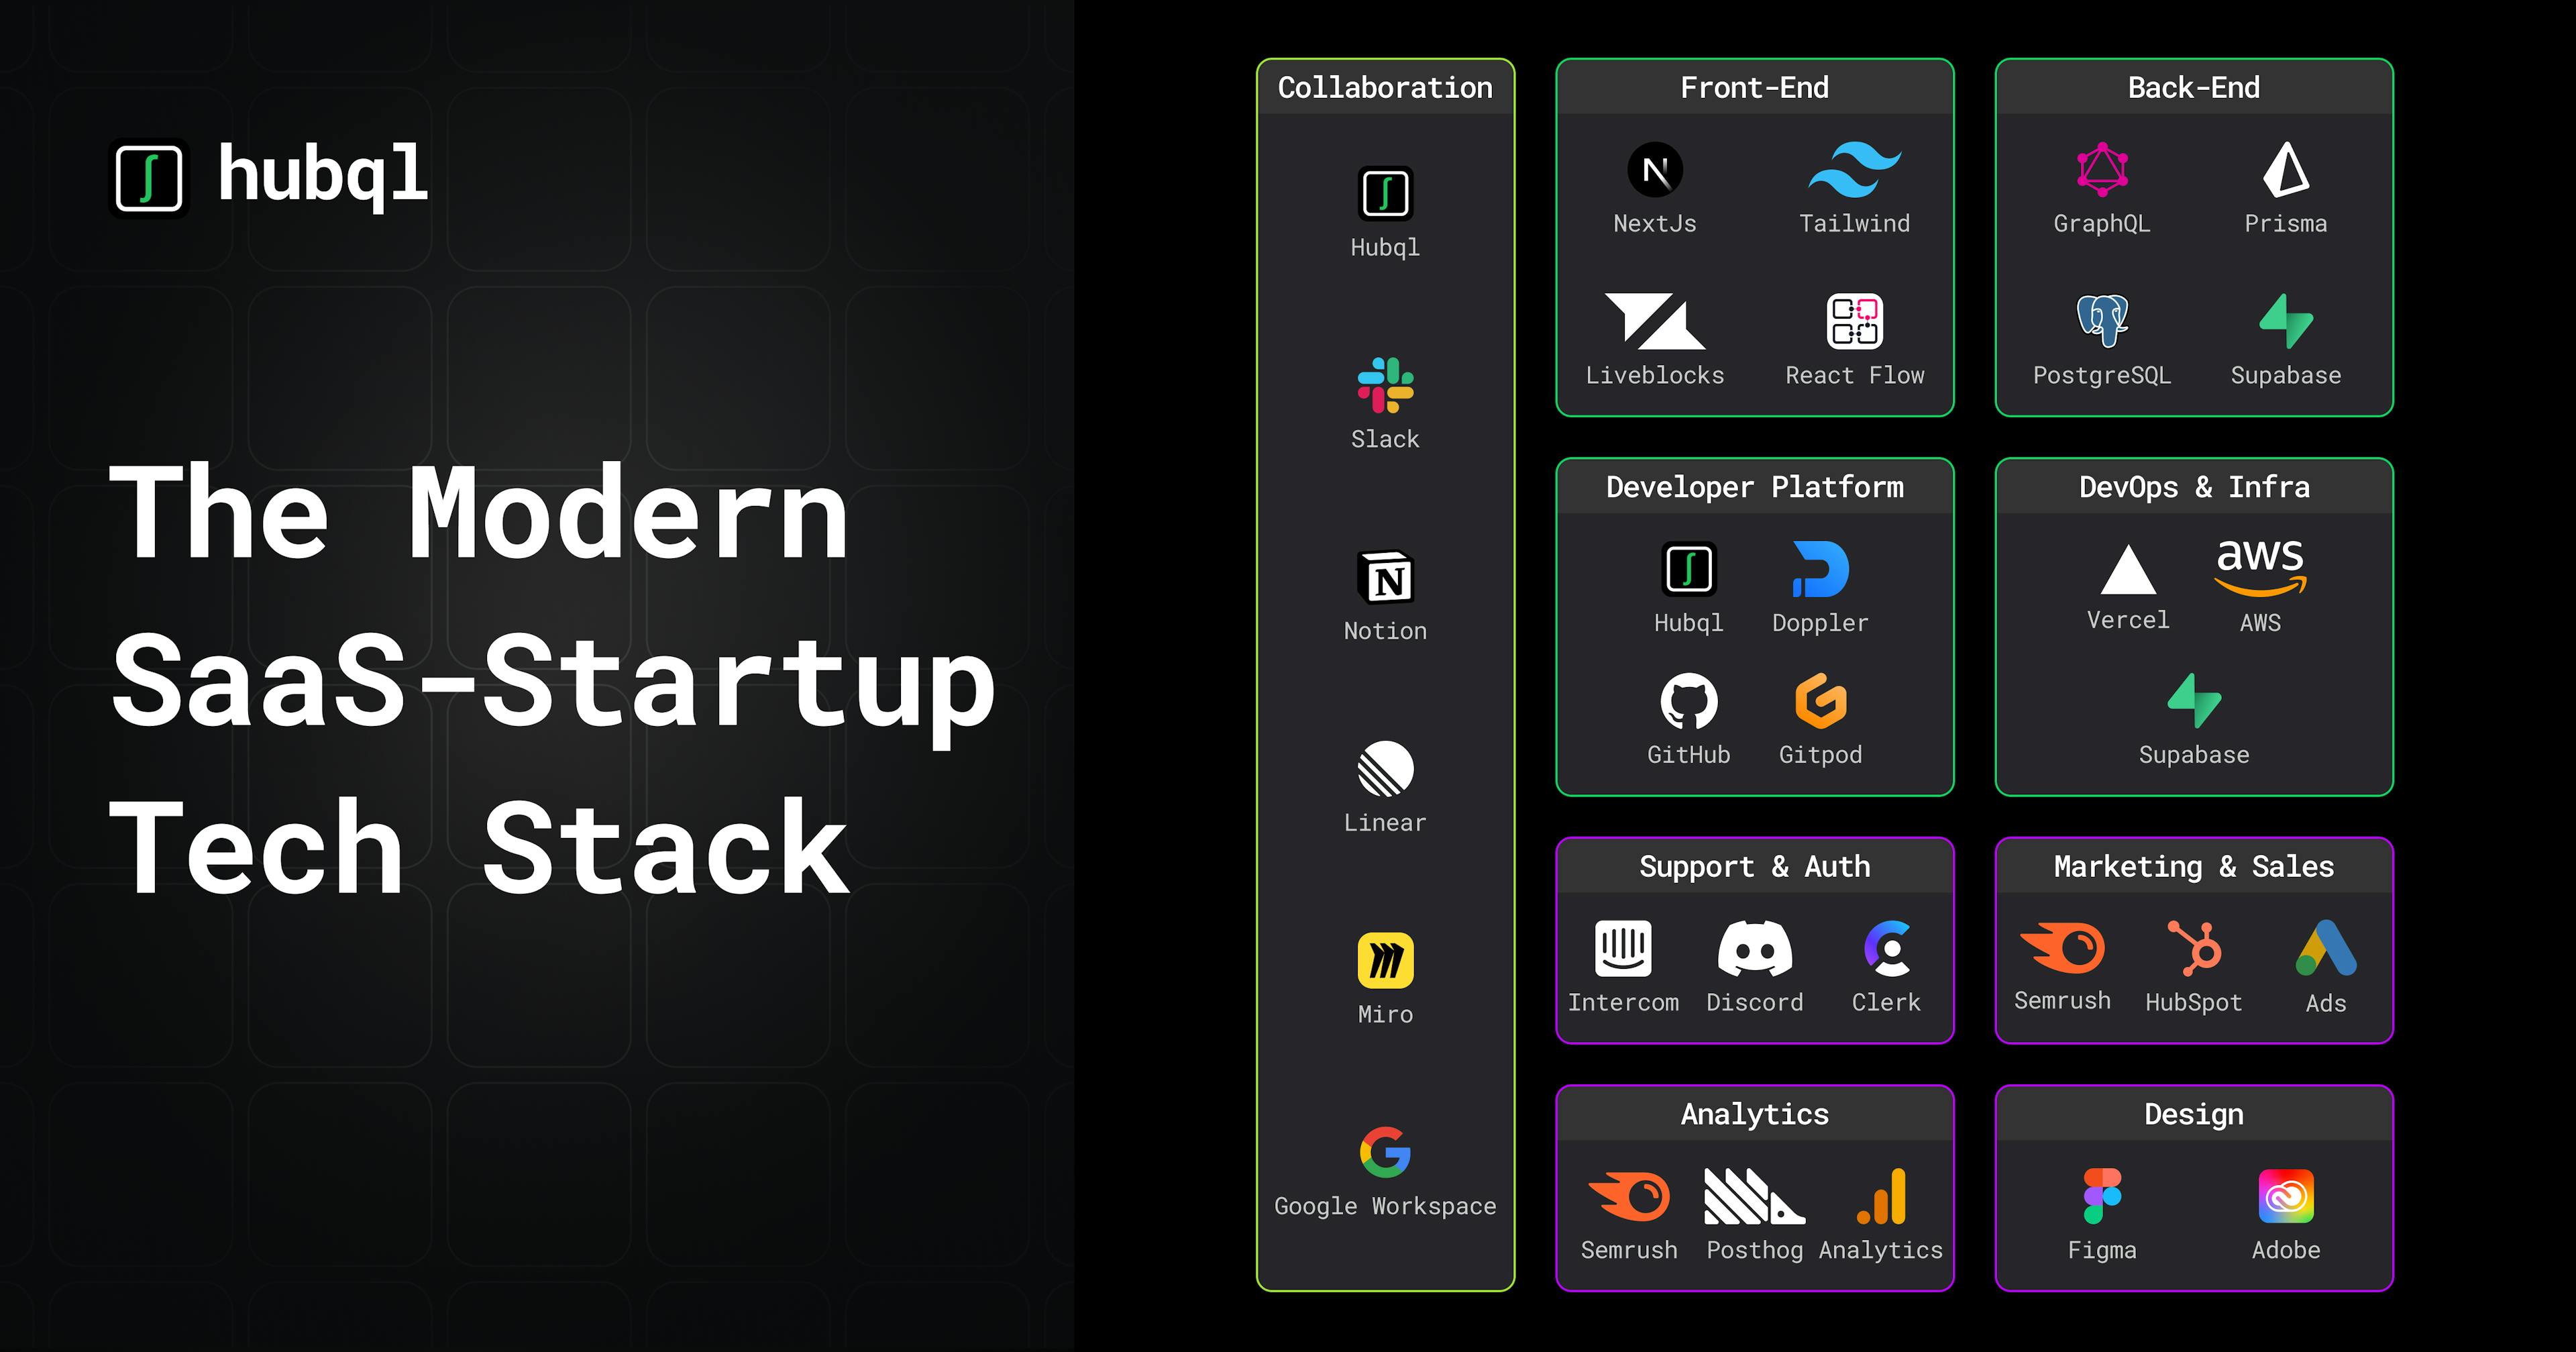 The modern SaaS-Startup Tech Stack